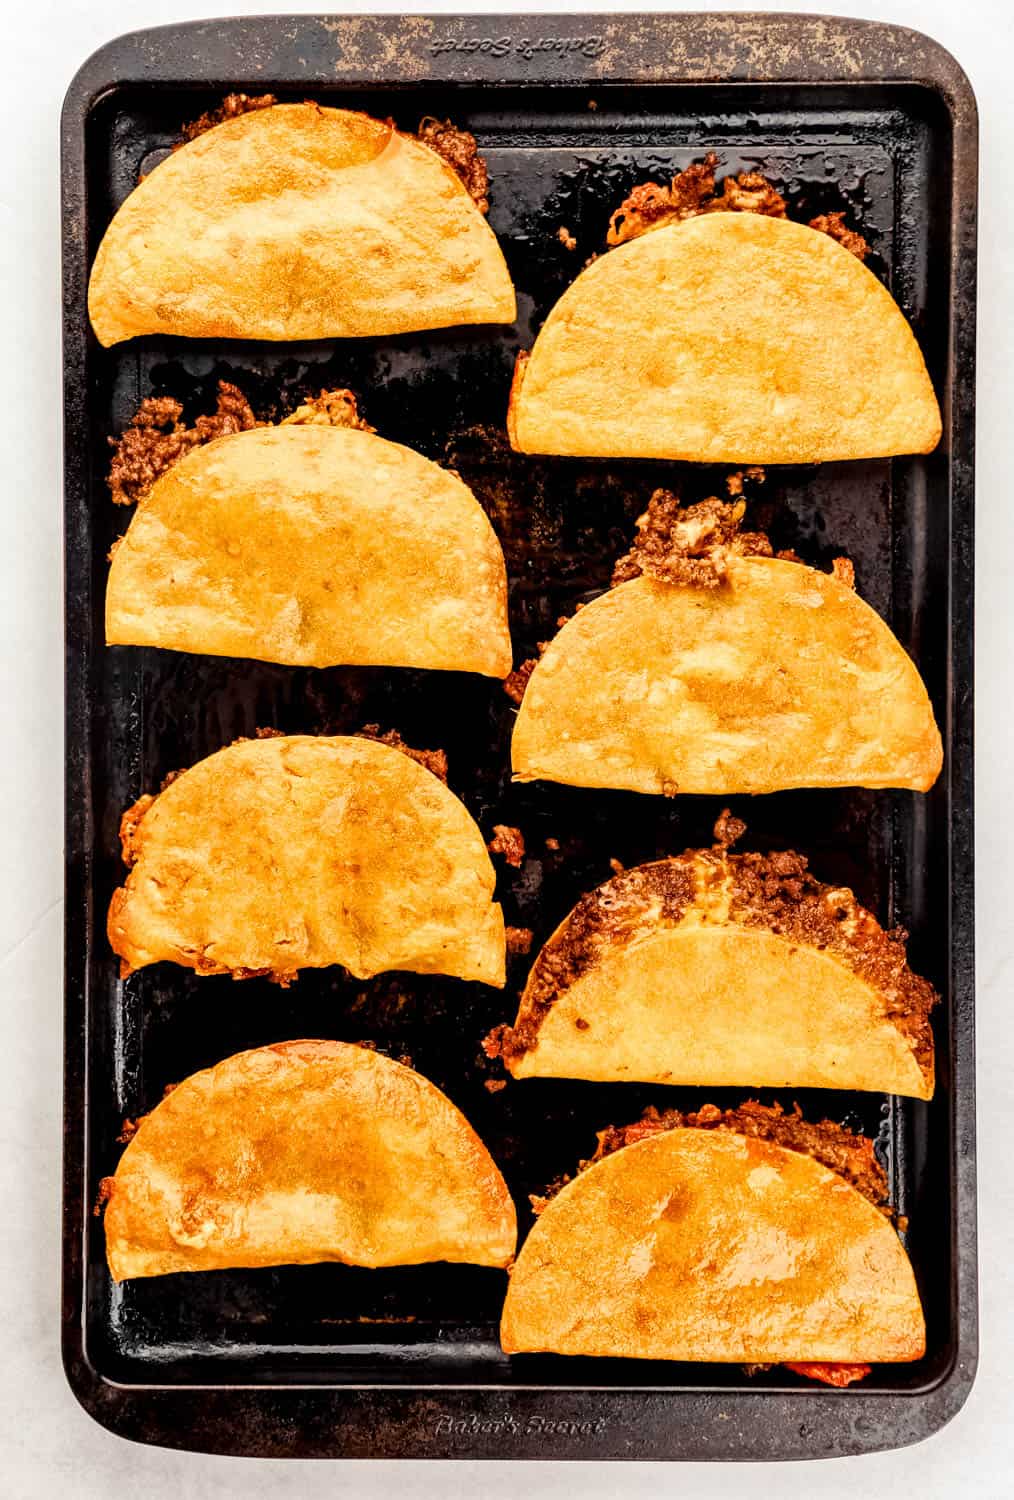 Overhead view of baked beef and cheese tacos on baking sheet. 